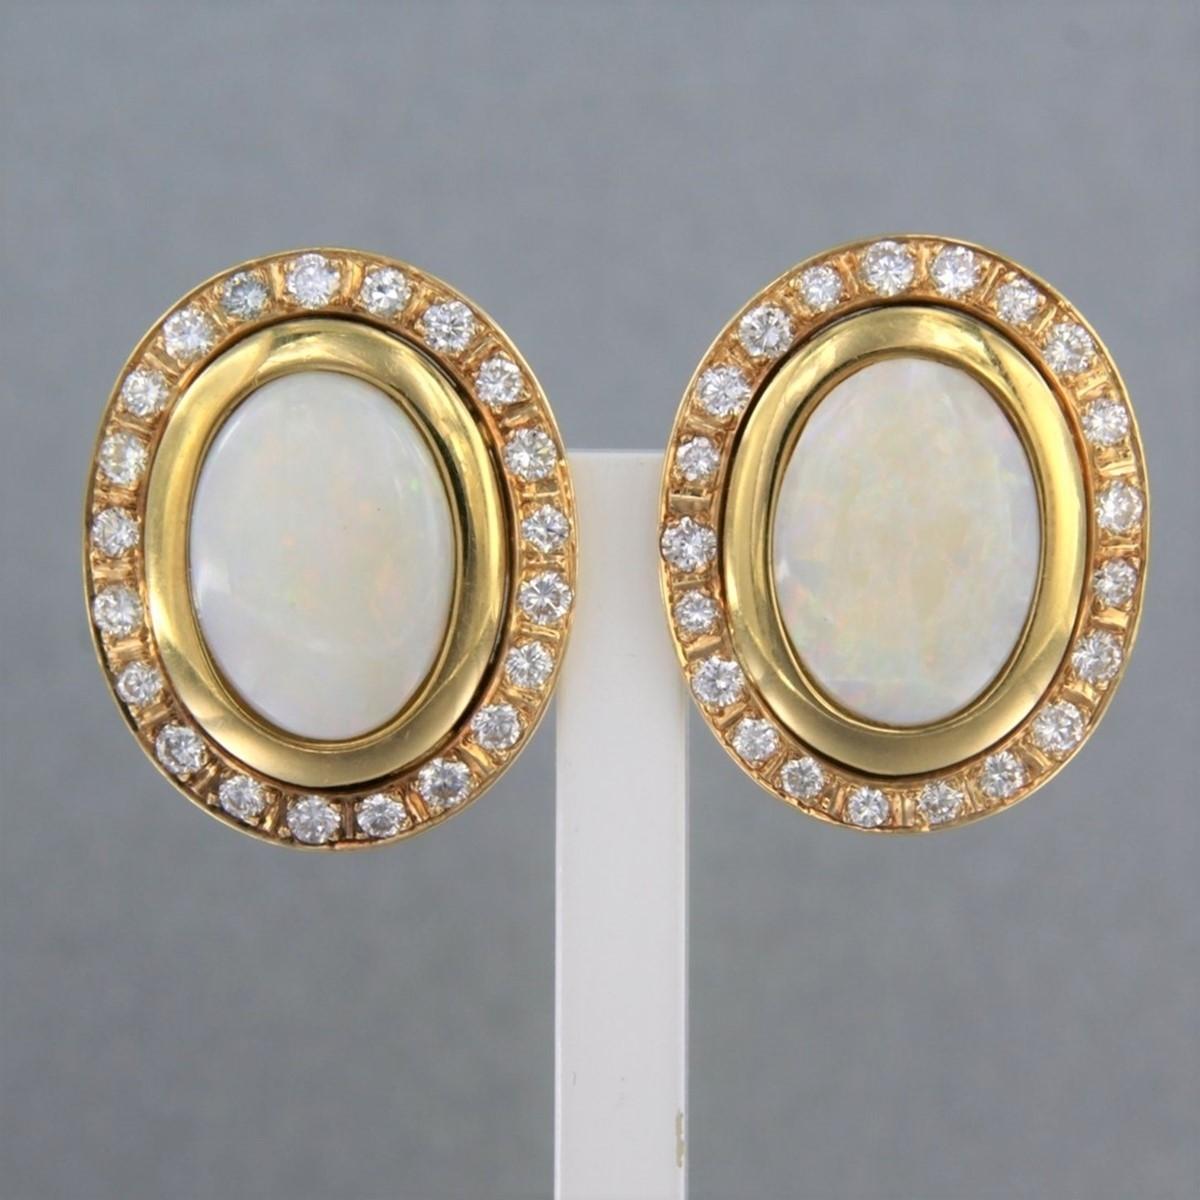 18 kt yellow gold ear clips set with opal and brilliant cut diamonds. 1.00ct - F/G - VS/SI

detailed description:

the top of the ear clip is 2.2 cm long by 1.8 cm wide

weight 12.1 grams

occupied with

- 2 x 1.4 cm x 9.8 mm oval cabochon cut